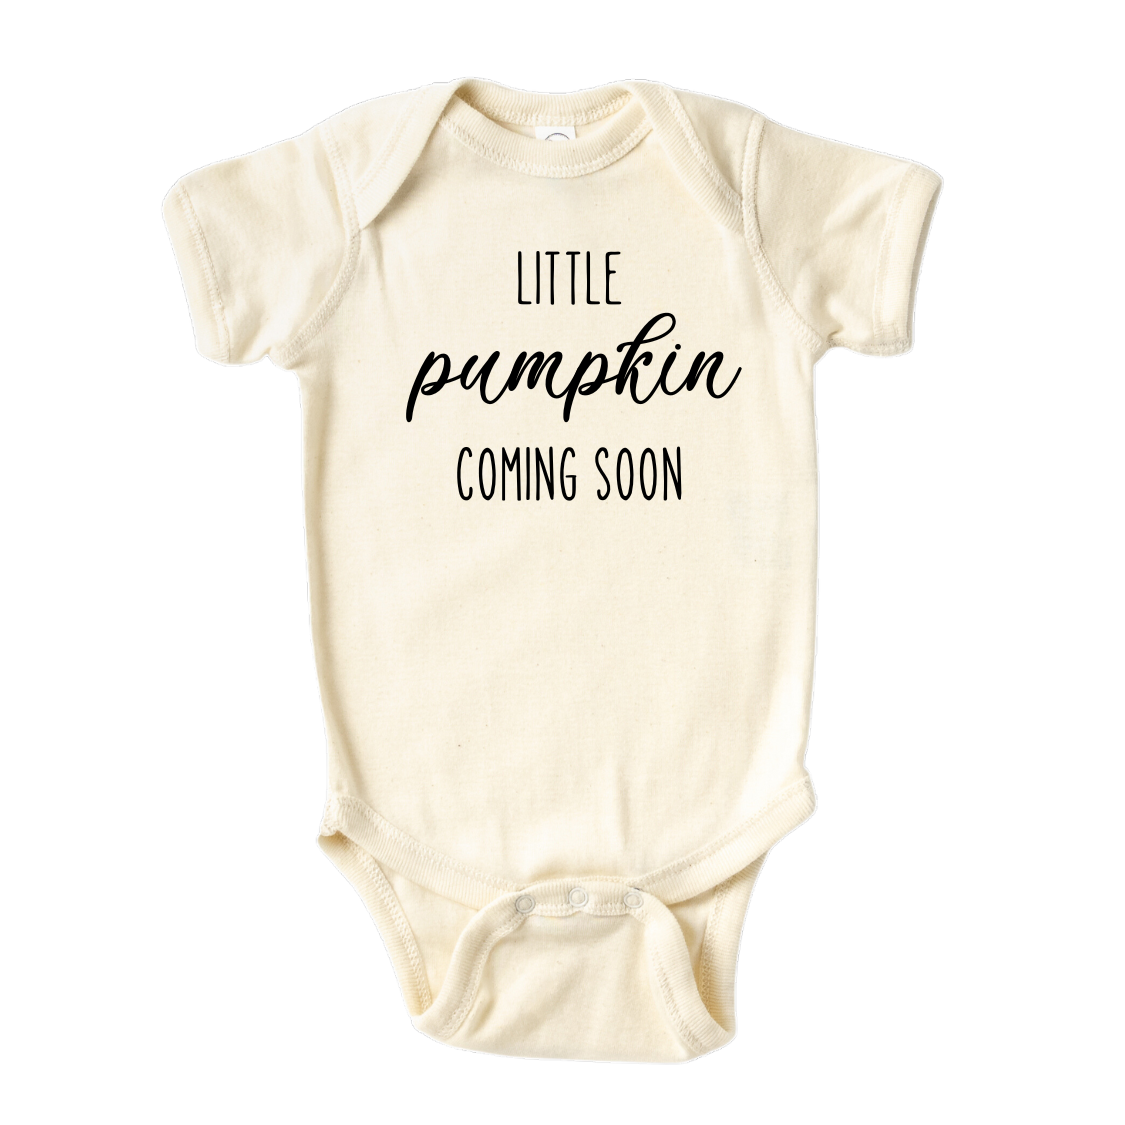 little pumpkin coming soon baby bodysuit gender neutral baby clothes baby boy outfits baby onesies newborn onesies baby girl onesies funny baby onesies baby announcement onesie personalized baby girl gifts custom baby onesie